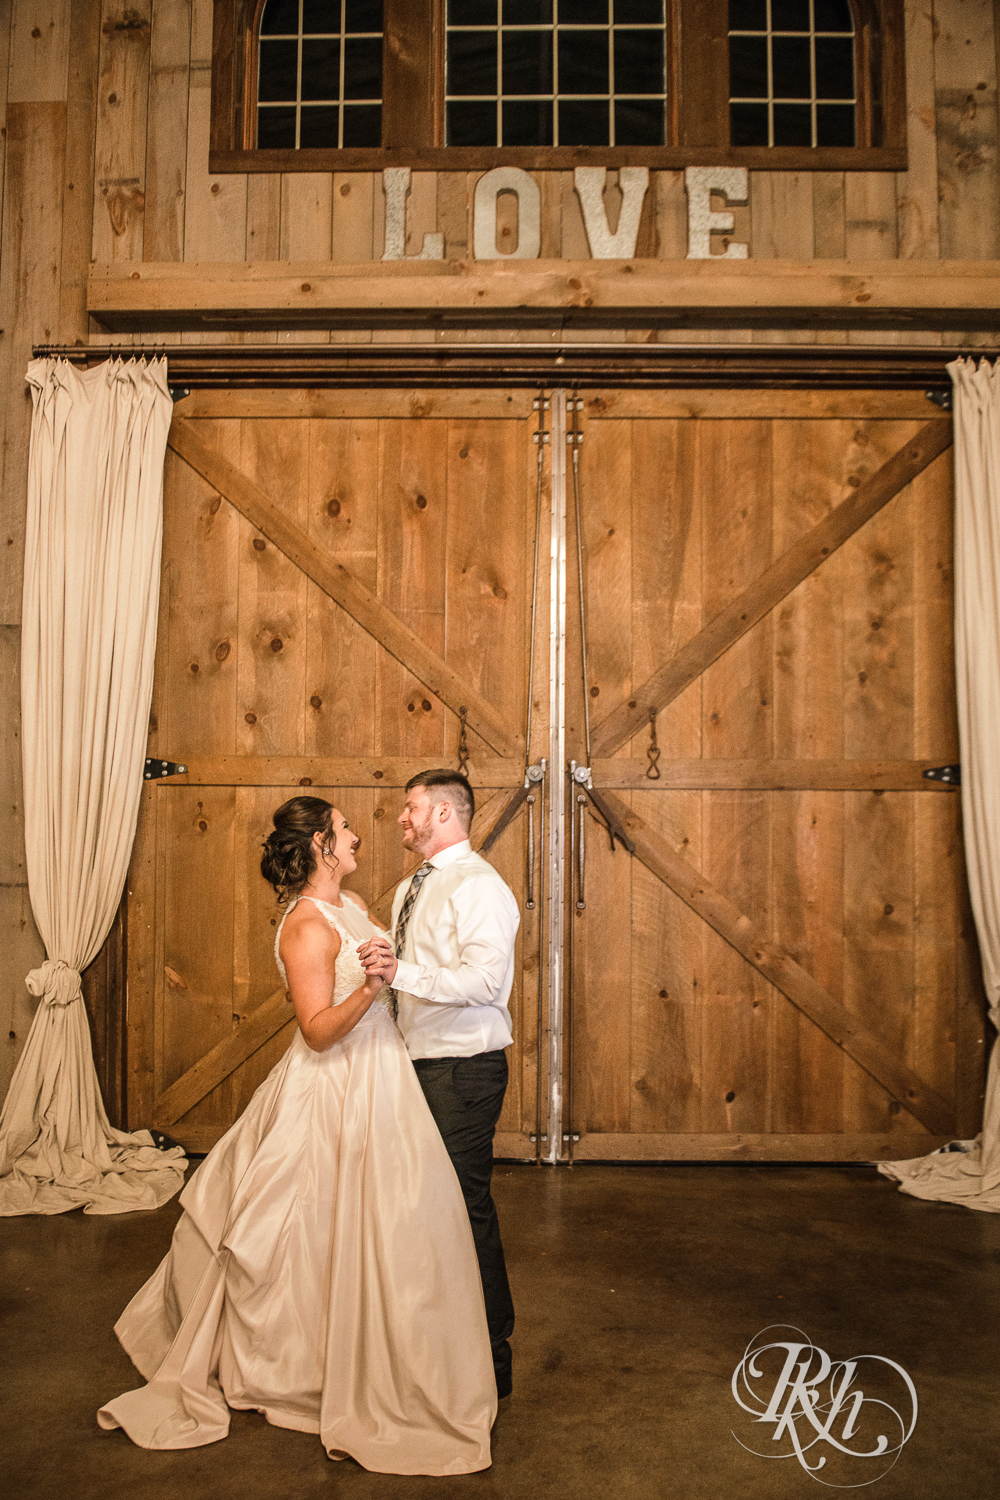 Bride and groom share first dance during reception at Creekside Farm in Rush City, Minnesota.